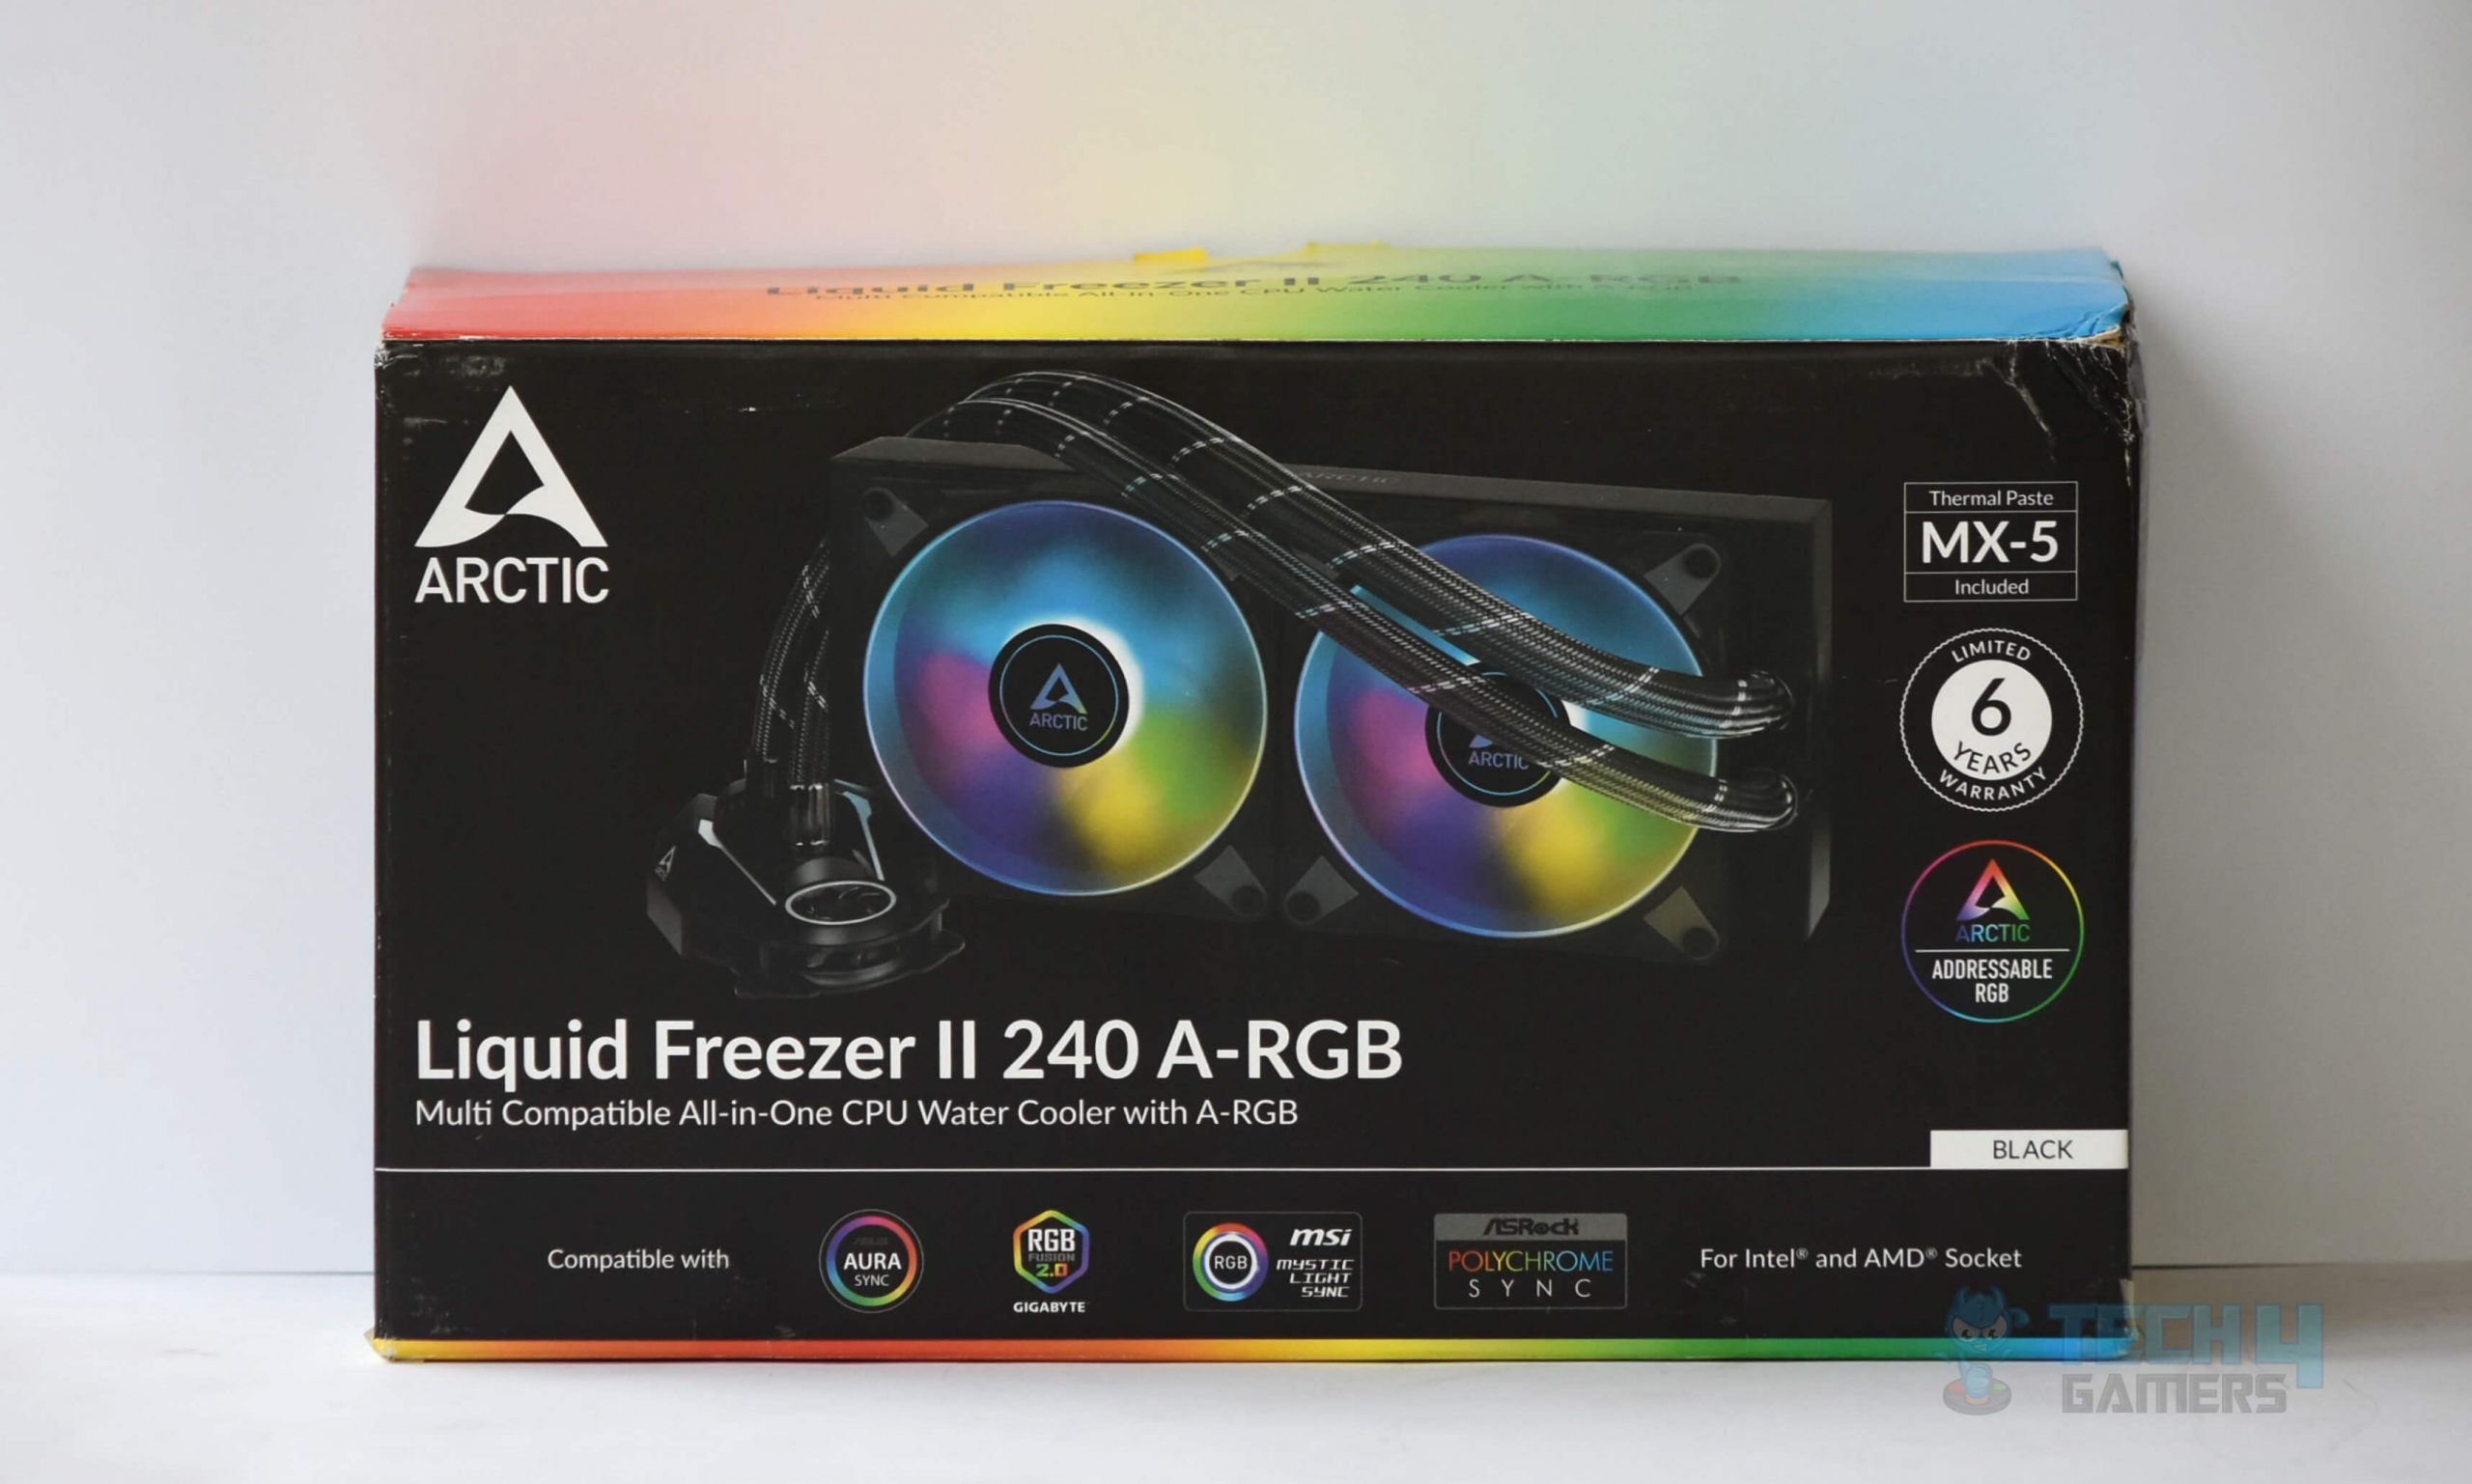 ARCTIC Liquid Freezer II 240 A-RGB All-in-One CPU Water Cooler ACFRE00093A  840033400978